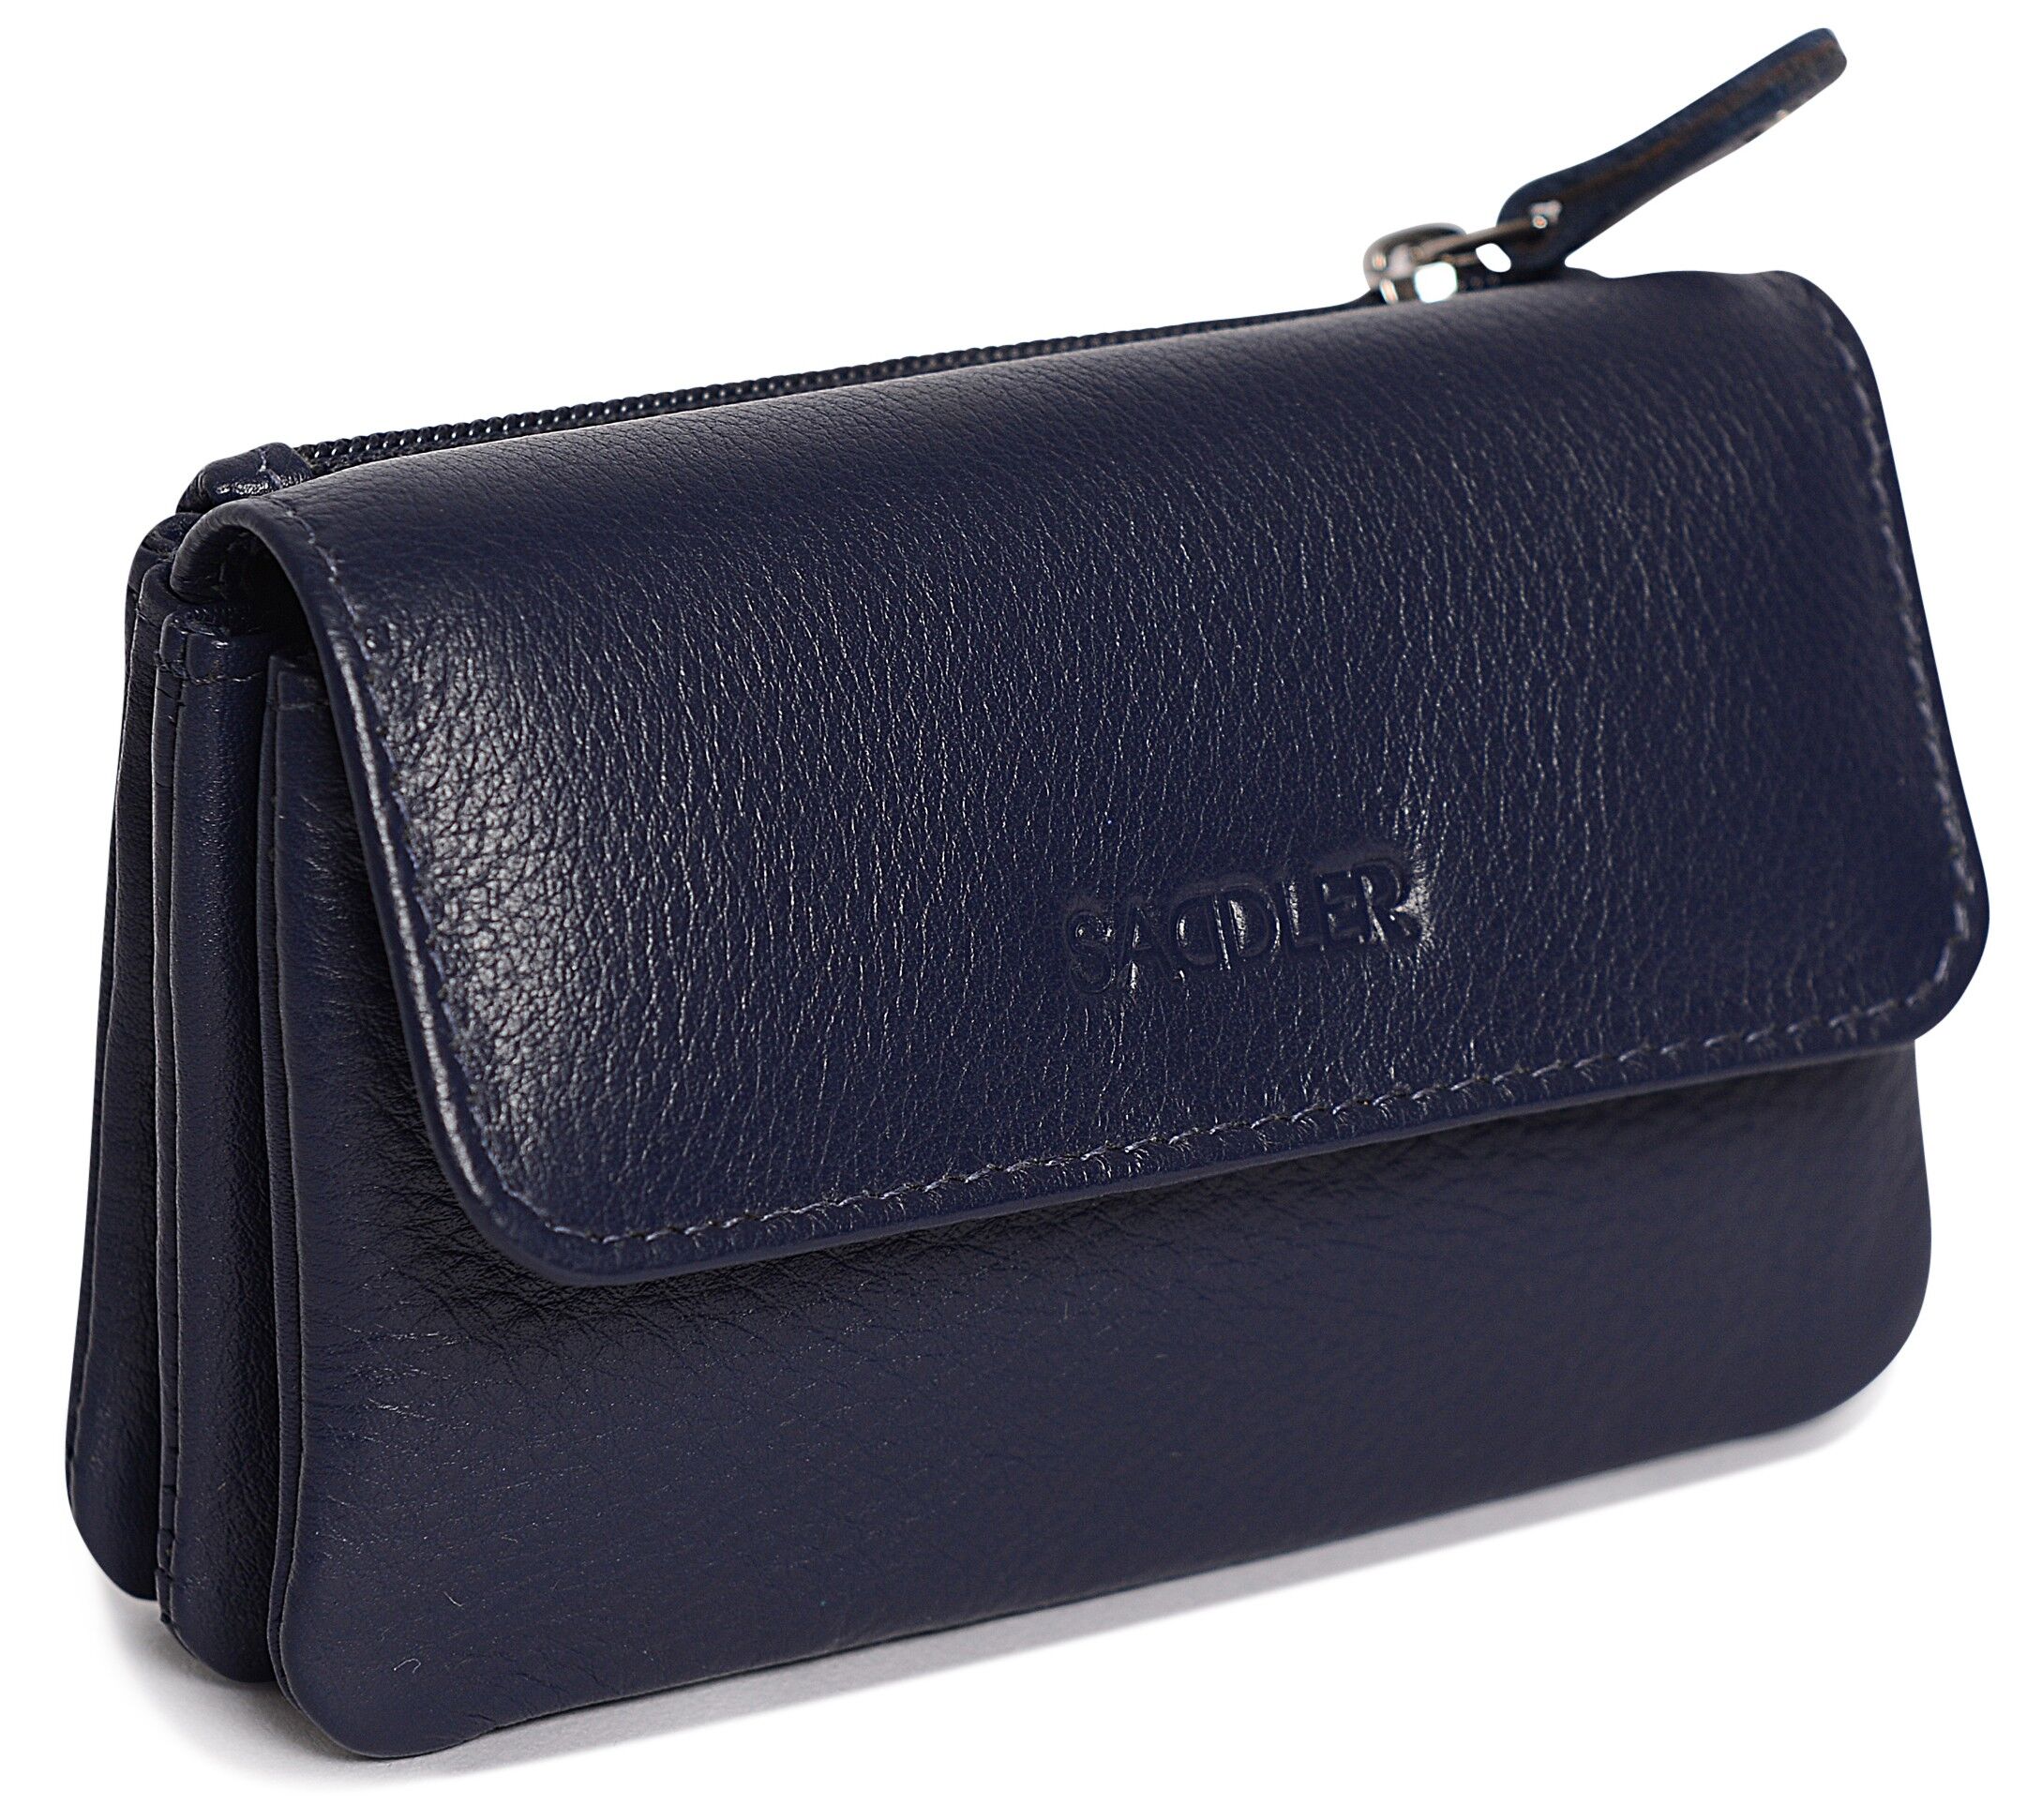 Small Mcm Purse|unisex Pu Leather Coin Purse With Zipper - Small Luxury Designer  Change Pouch